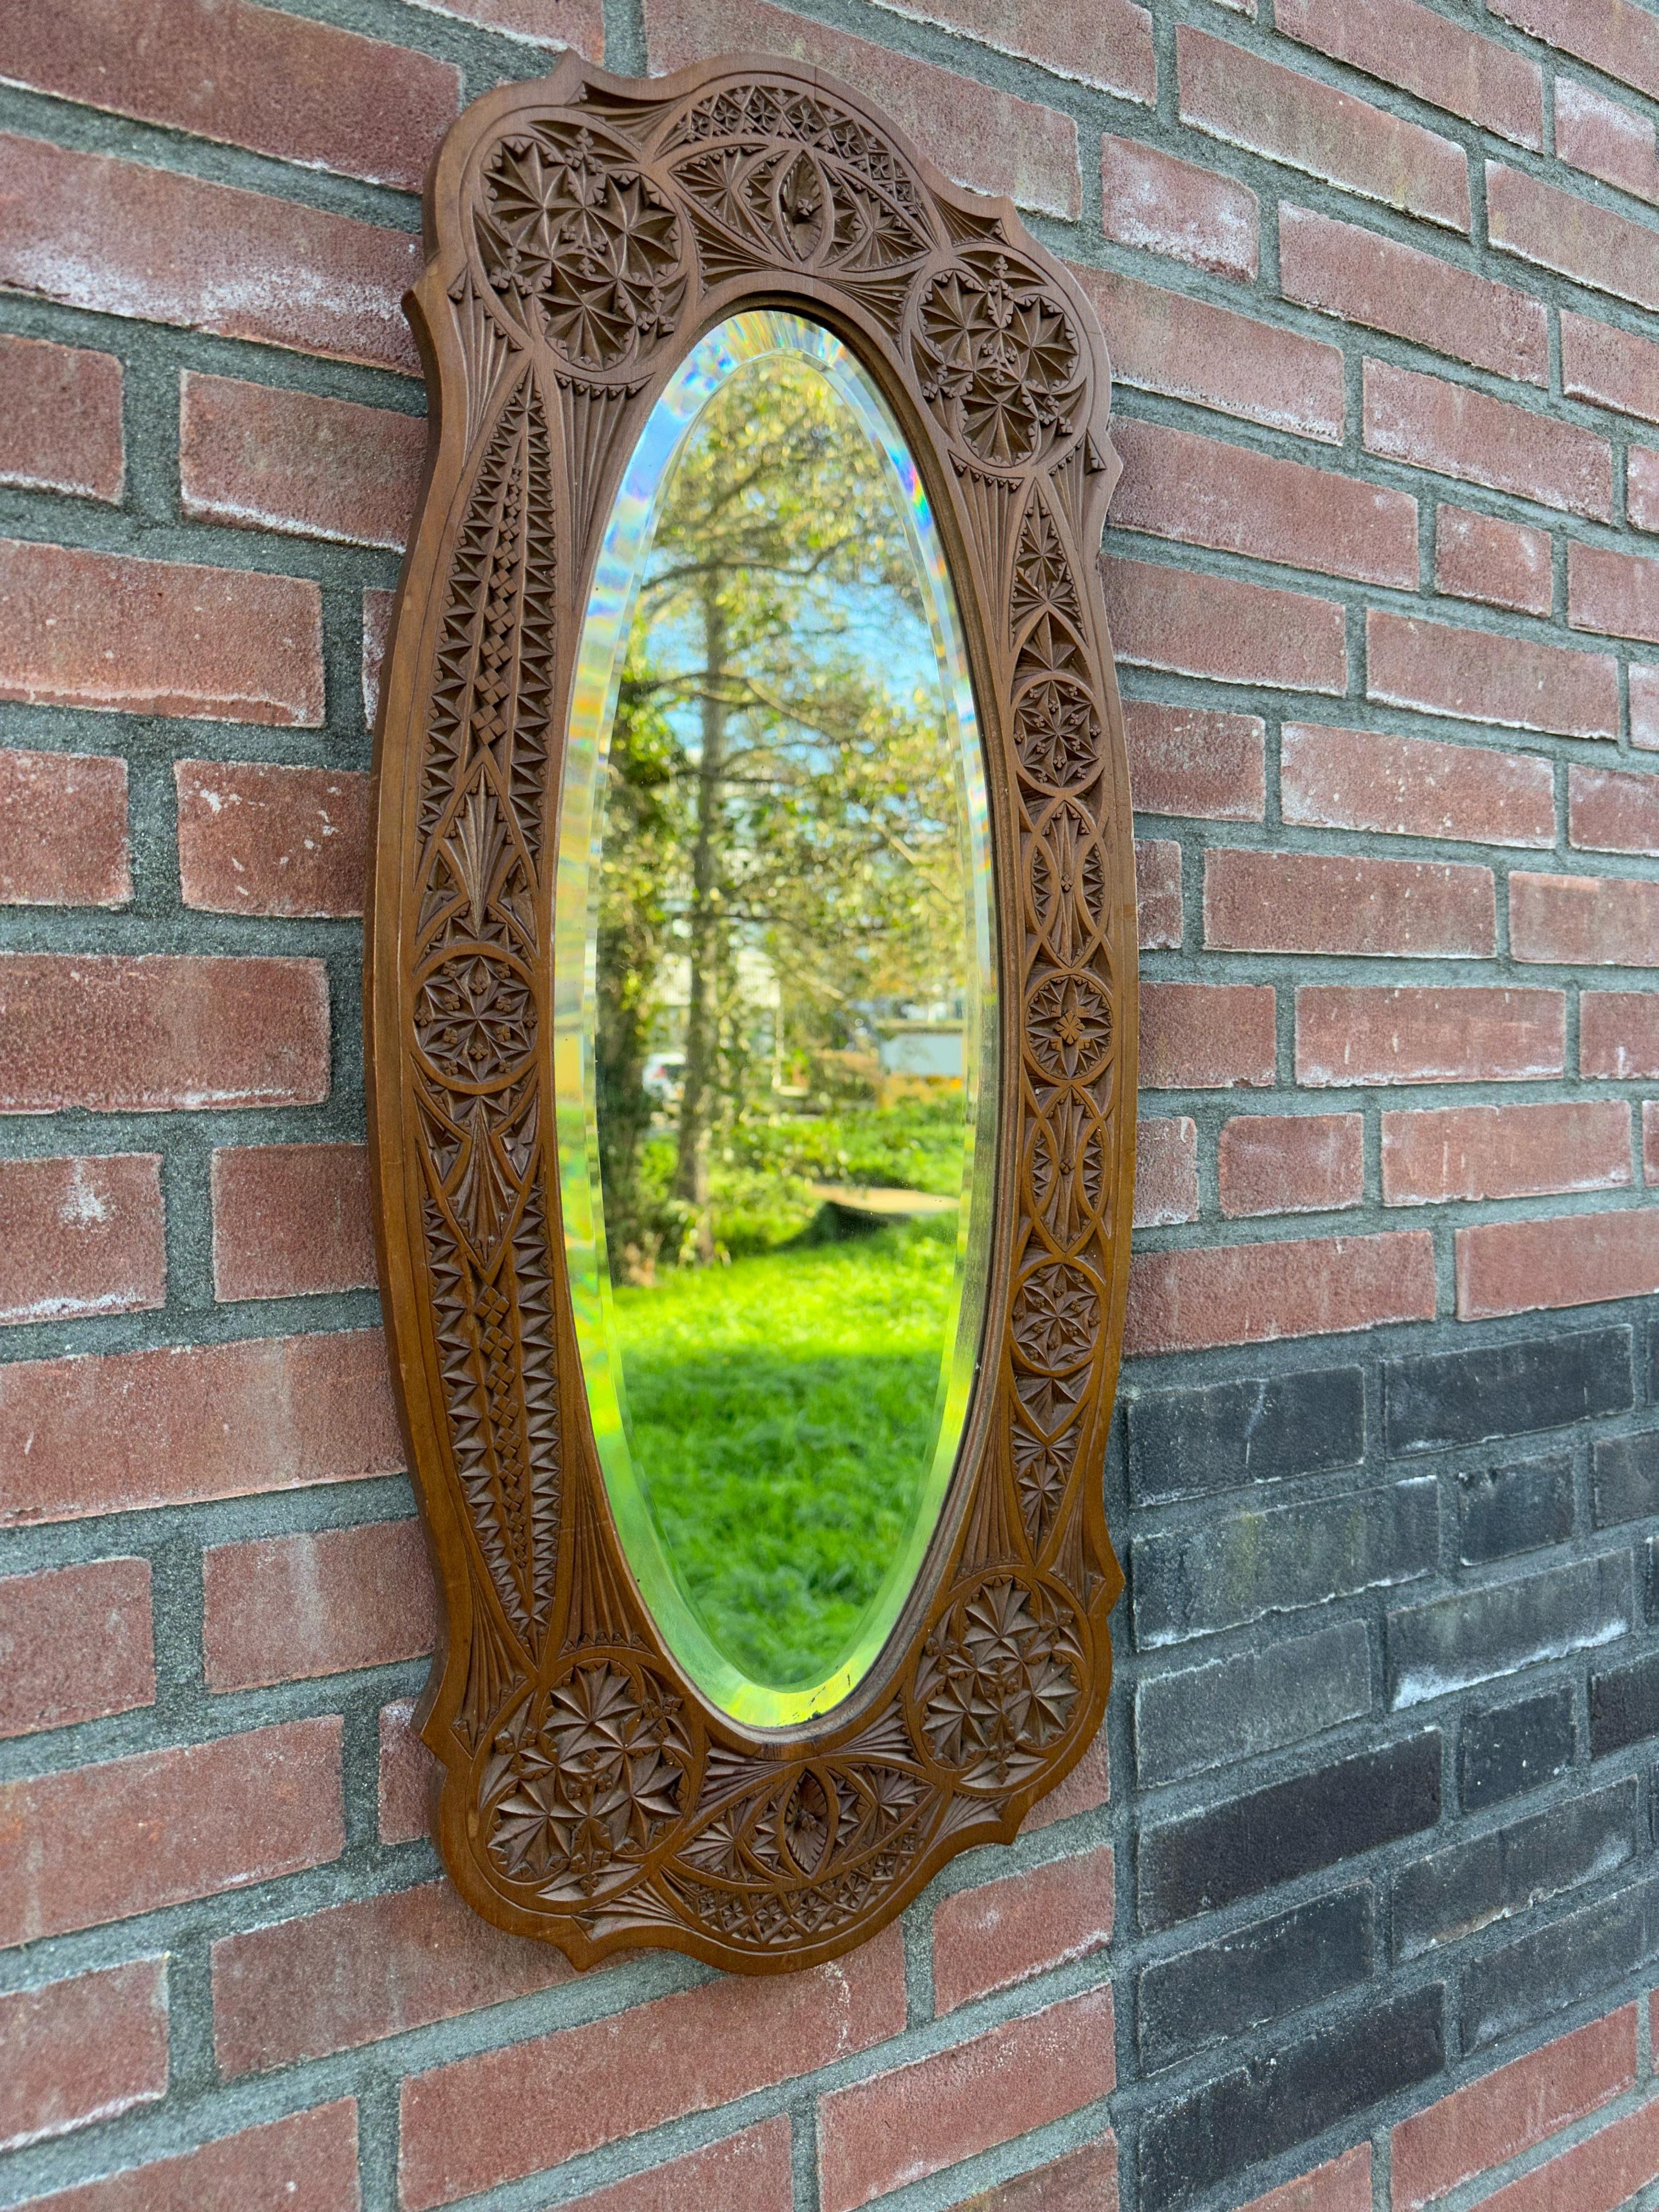 Striking wall mirror with handcarved geometrical 'flowers' and trefoil symbols.

Via one of our foreign contacts we recently purchased this perfectly fine and deeply handcarved, sculptural wall mirror. This perfectly handcarved wooden frame has